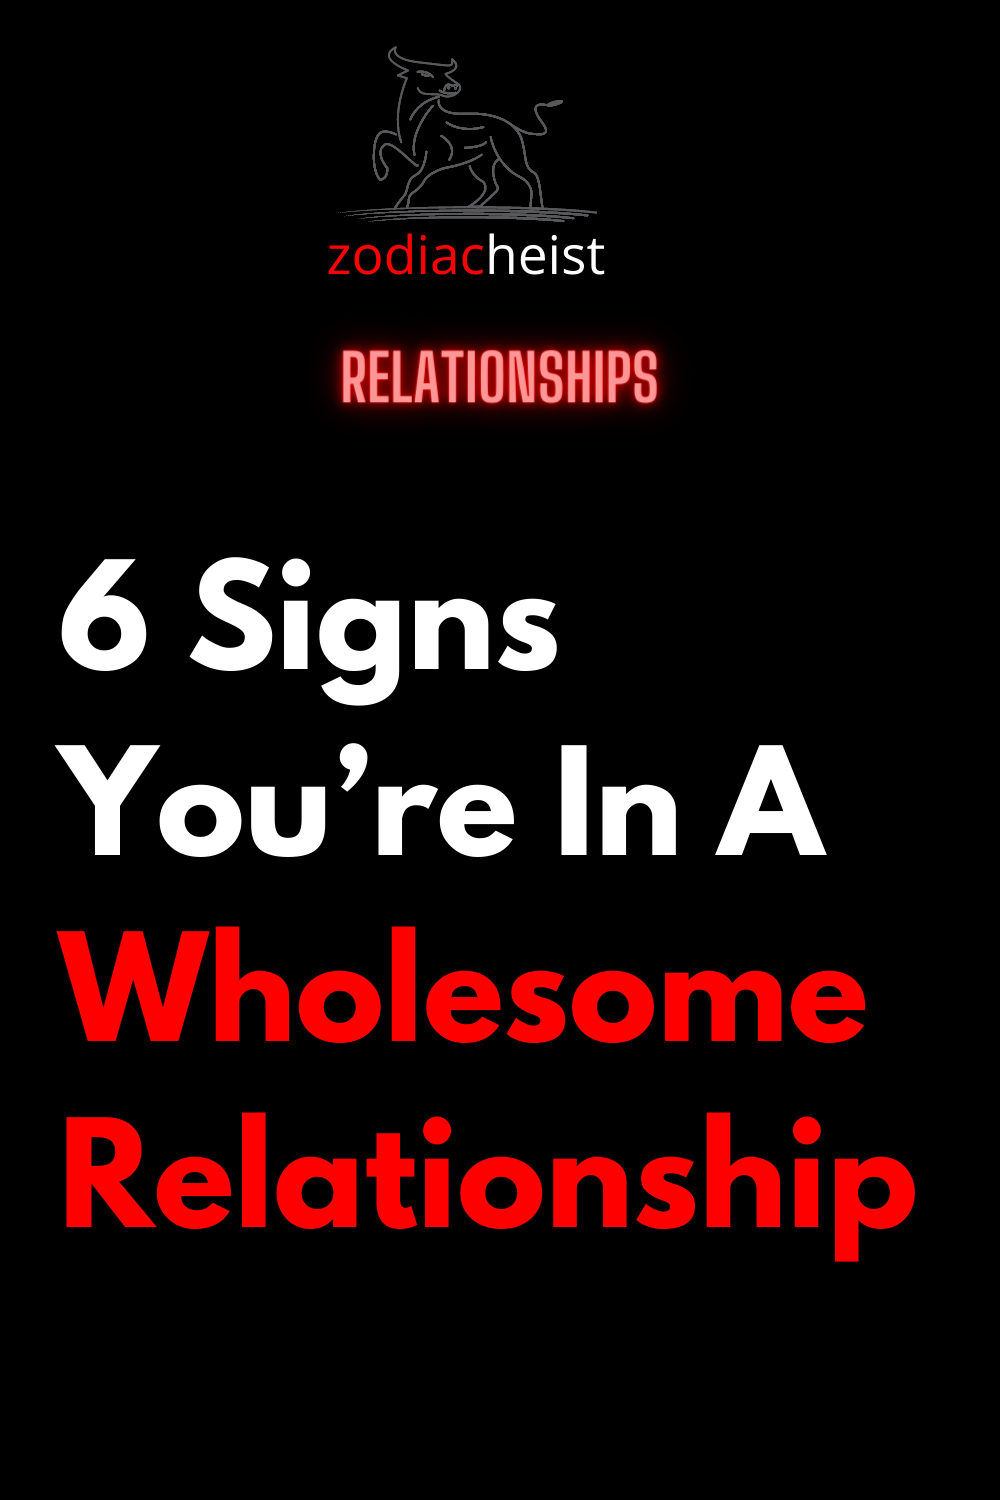 6 Signs You’re In A Wholesome Relationship